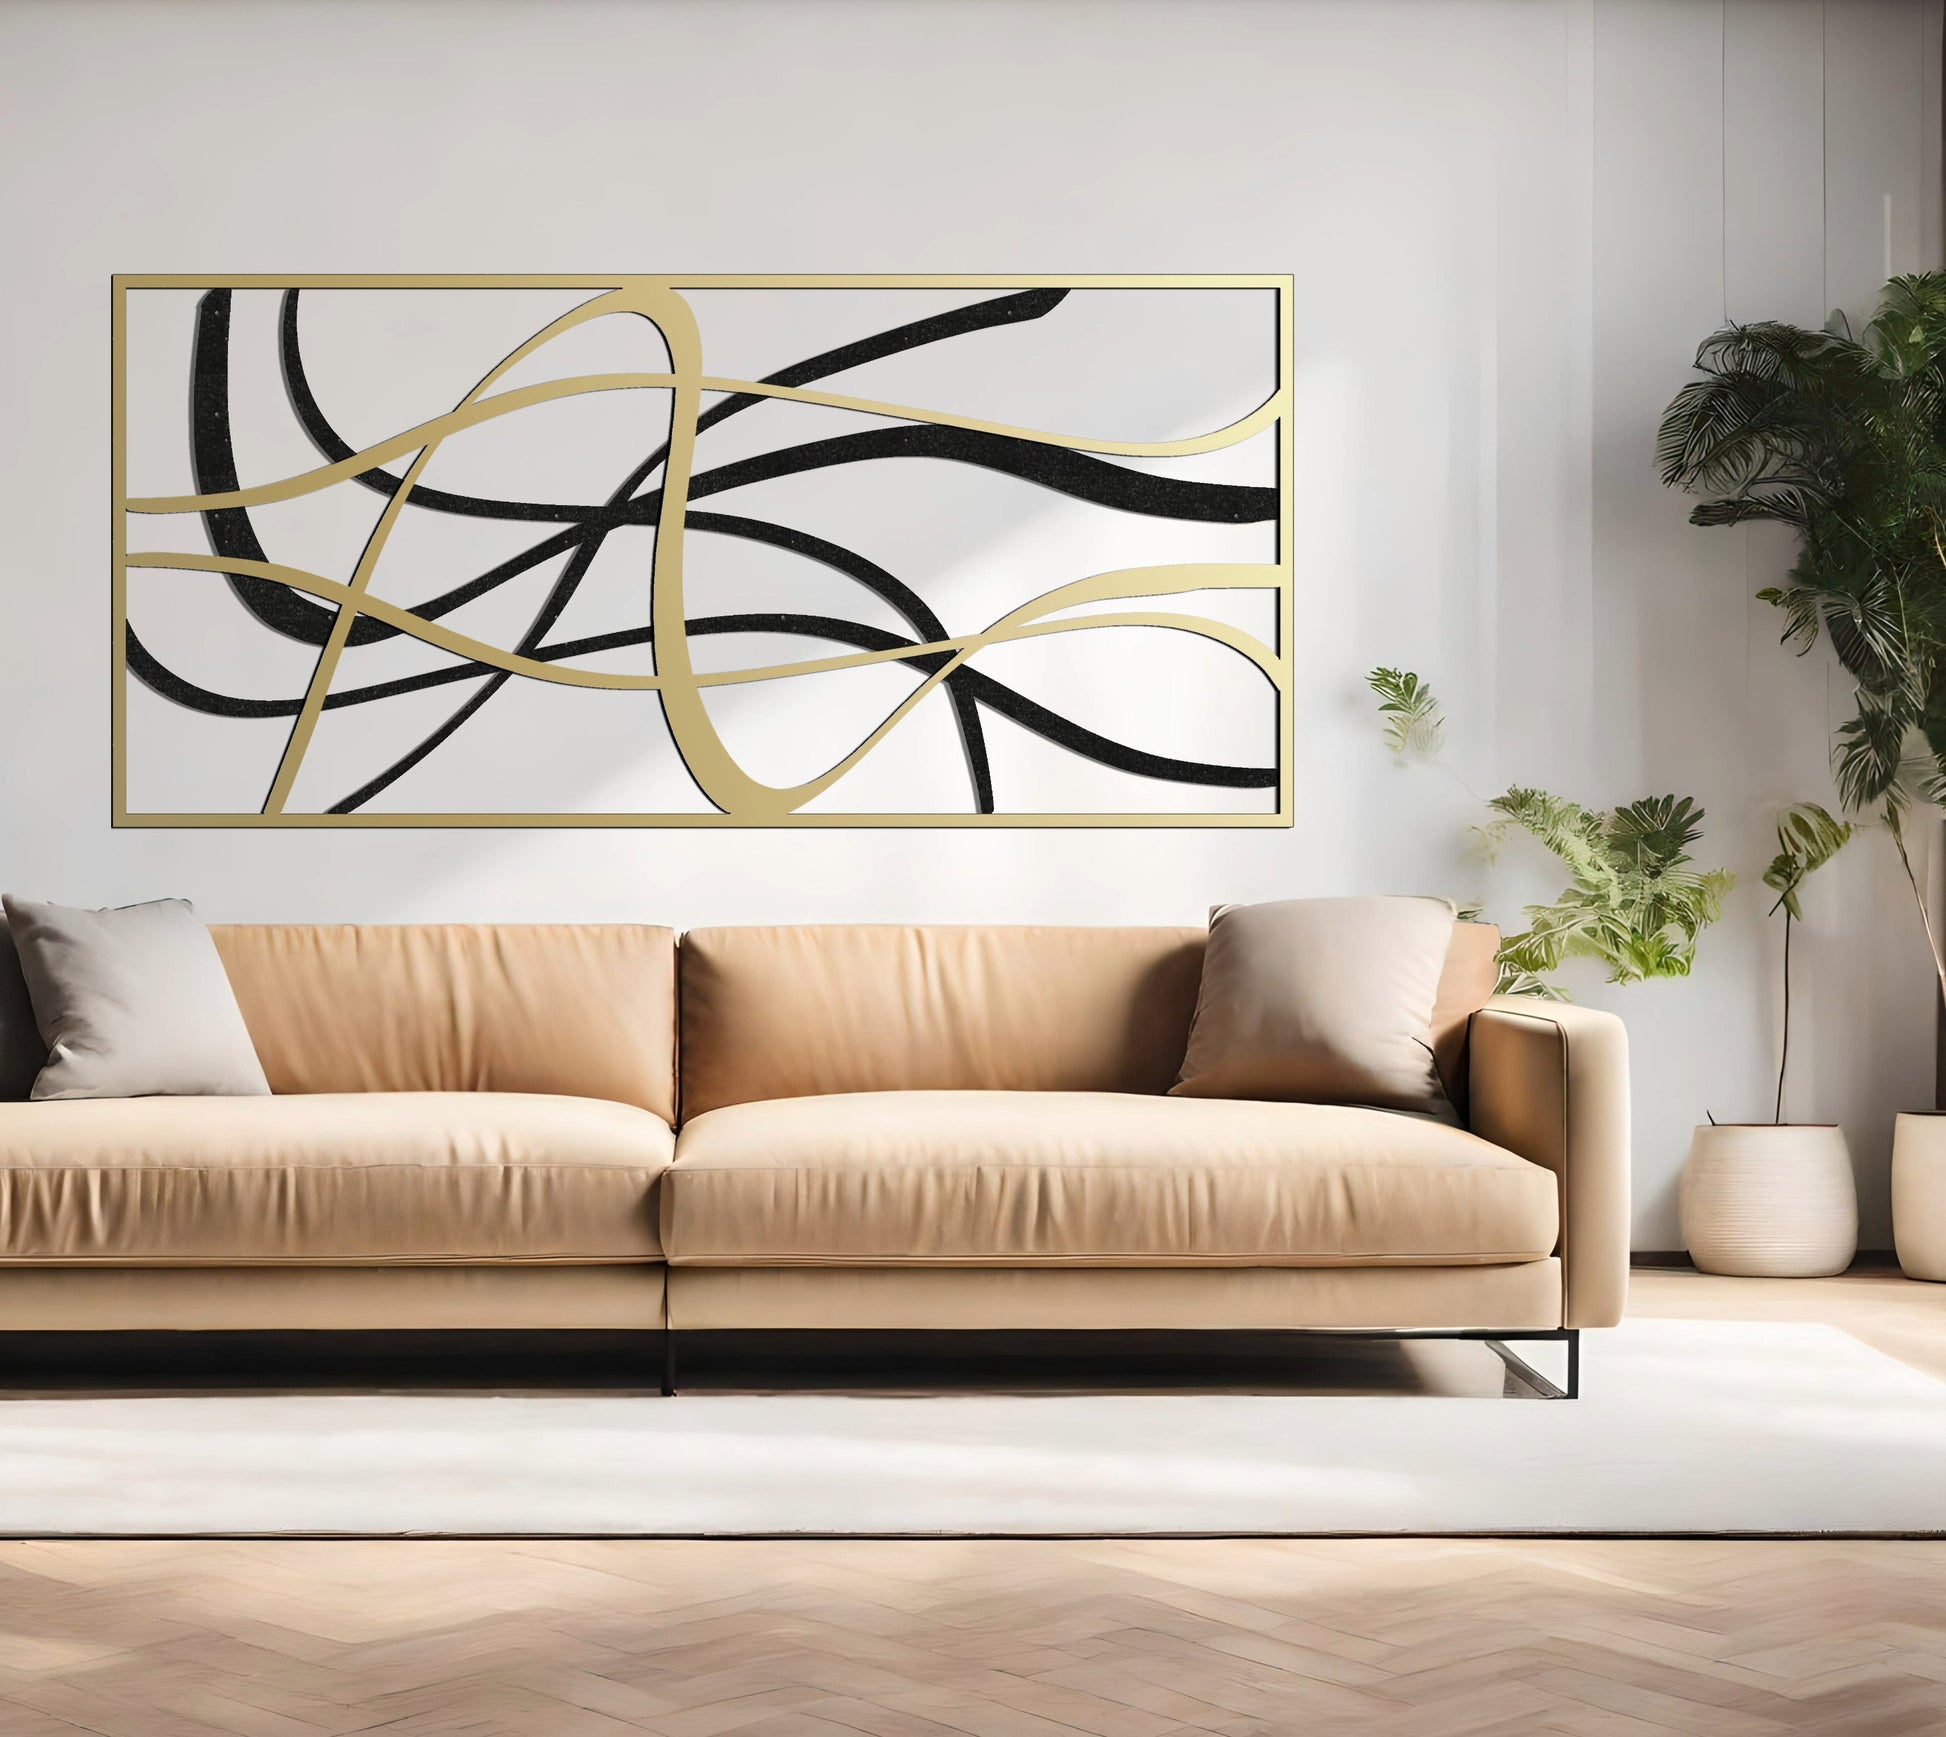 Oversize Abstract Metal Wall Art, Black and Gold Metal Decor, Modern Living Room, Large Home Gift